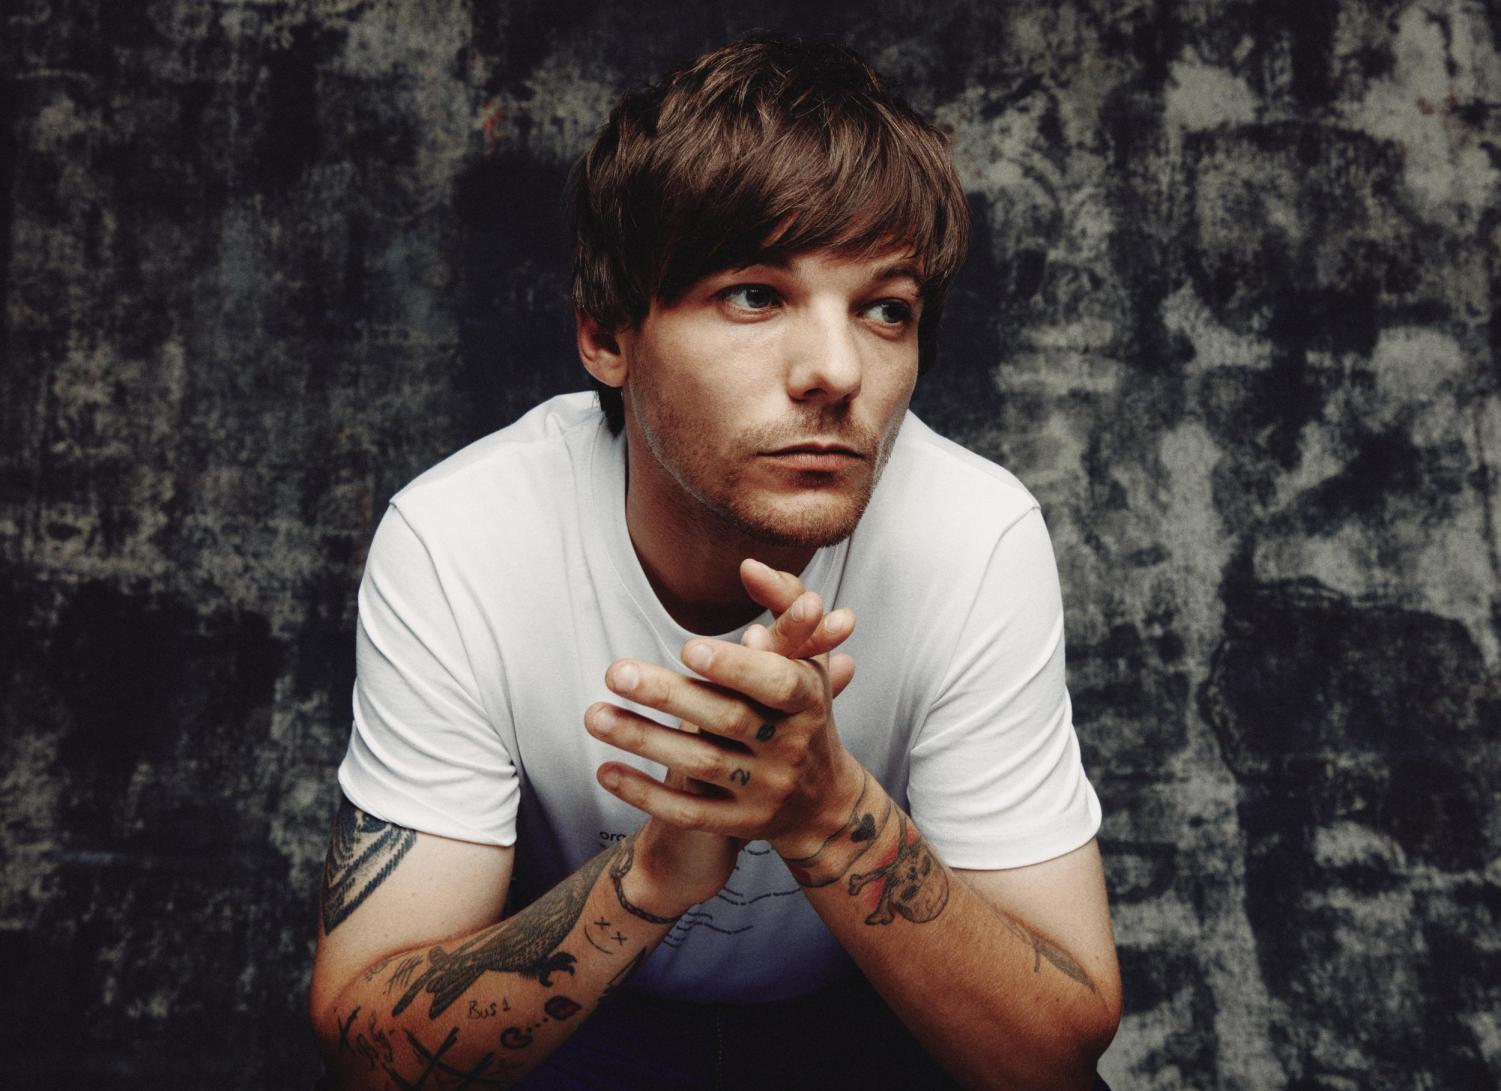 Louis Tomlinson's 'Walls' wins Album of the Year